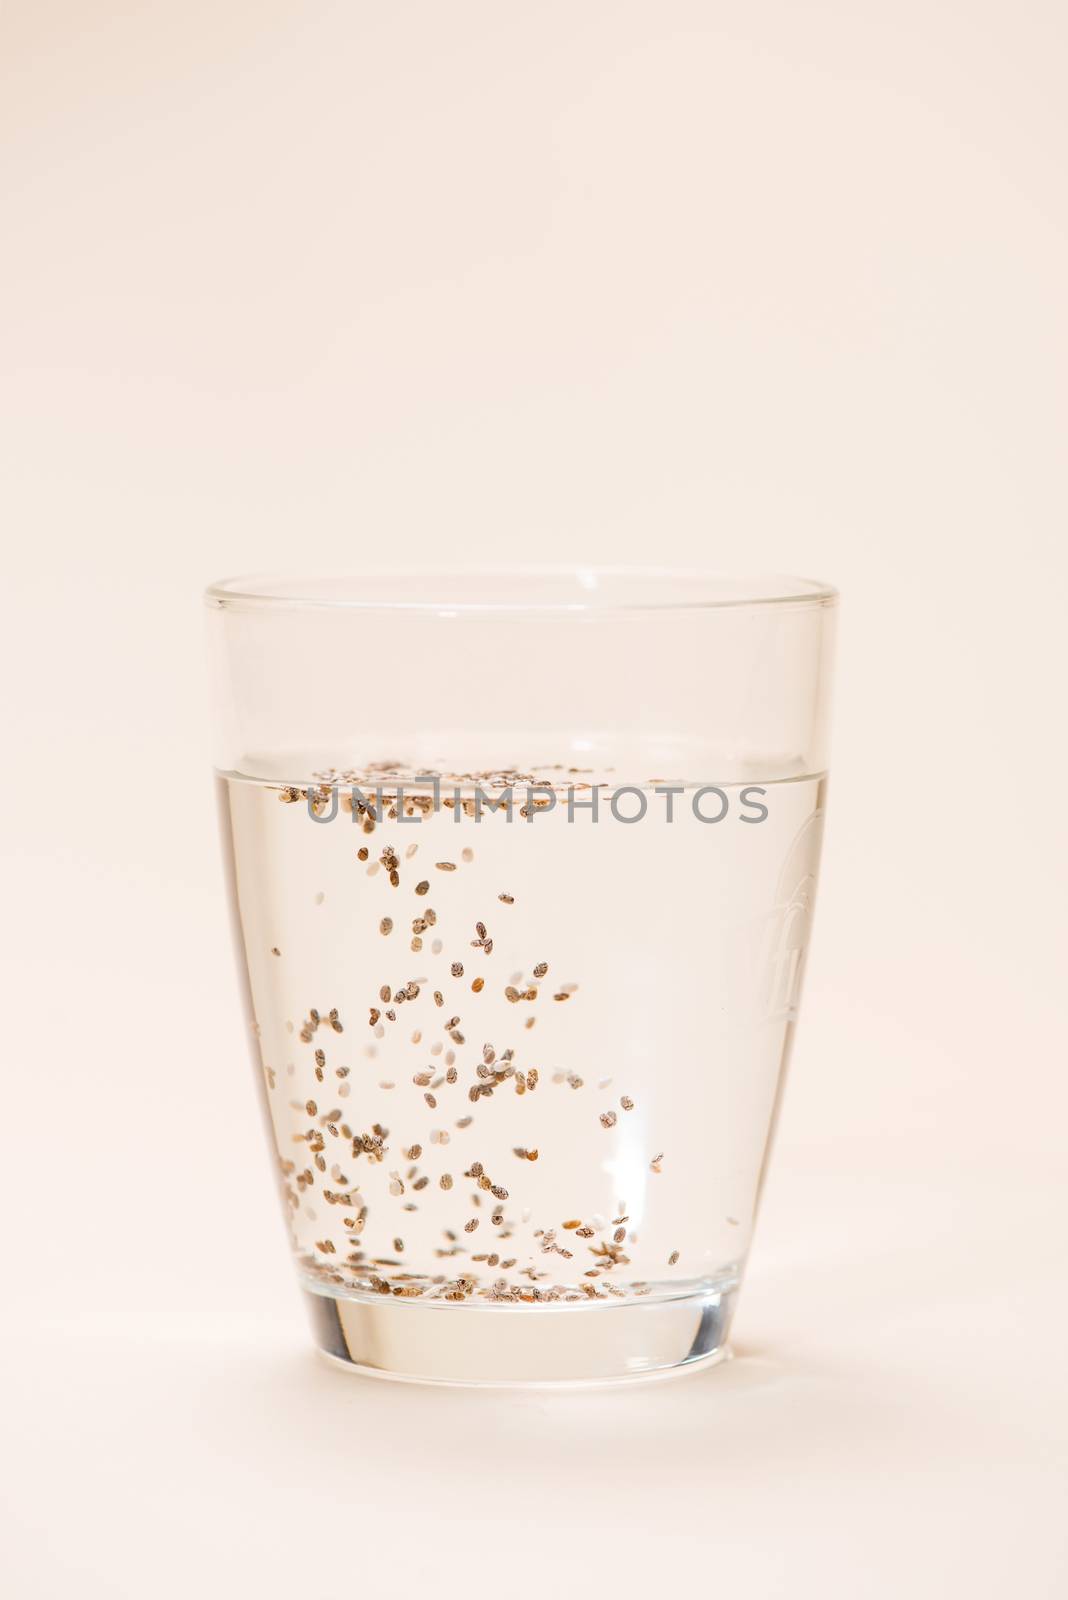 Glass of water with cup of healthy chia seeds and spoon. Text sp by makidotvn